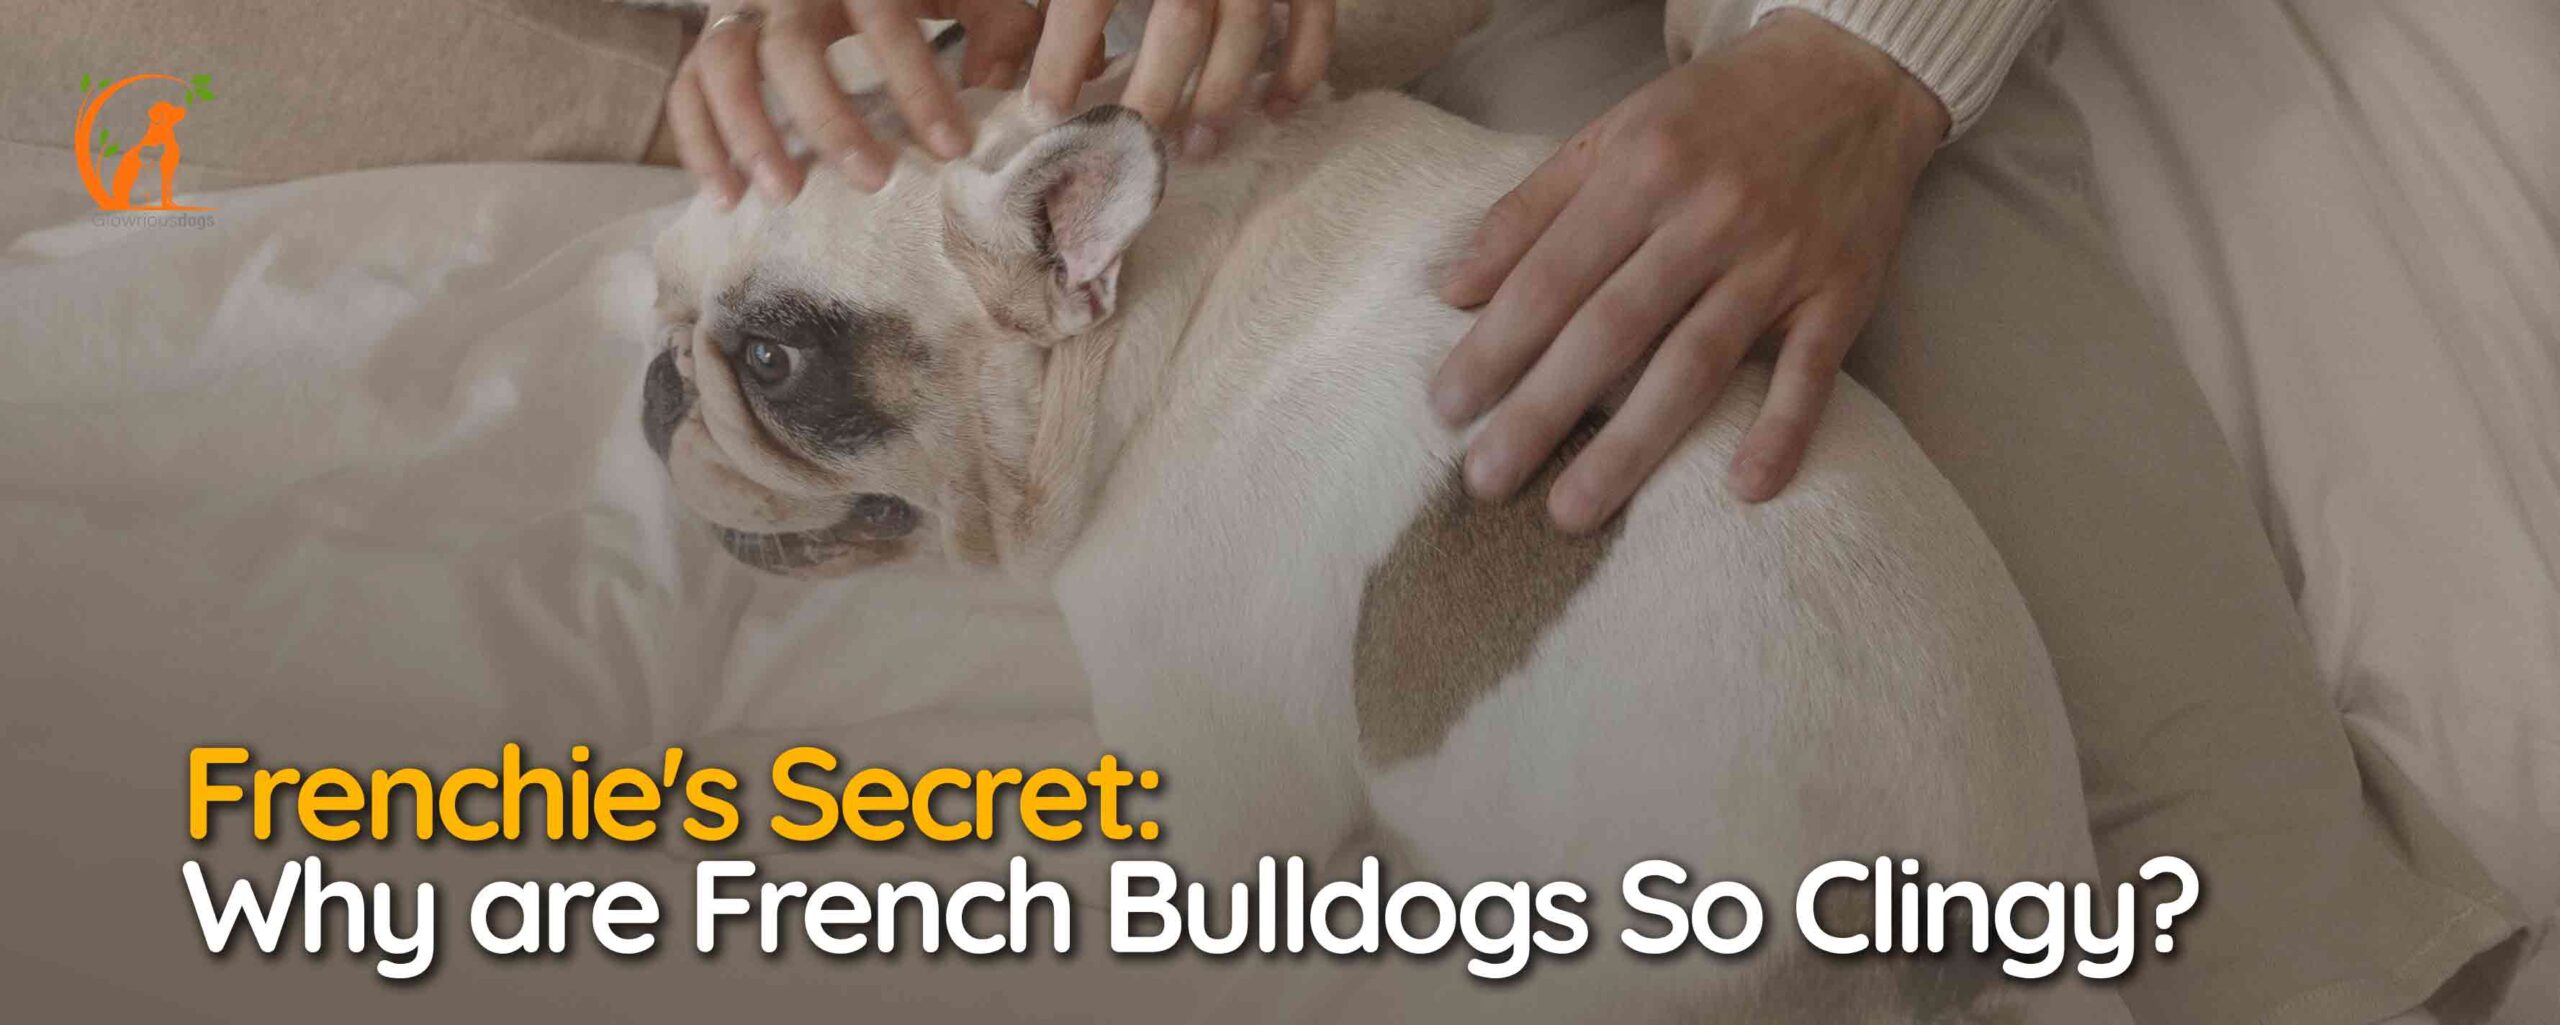 Why are French Bulldogs So Clingy